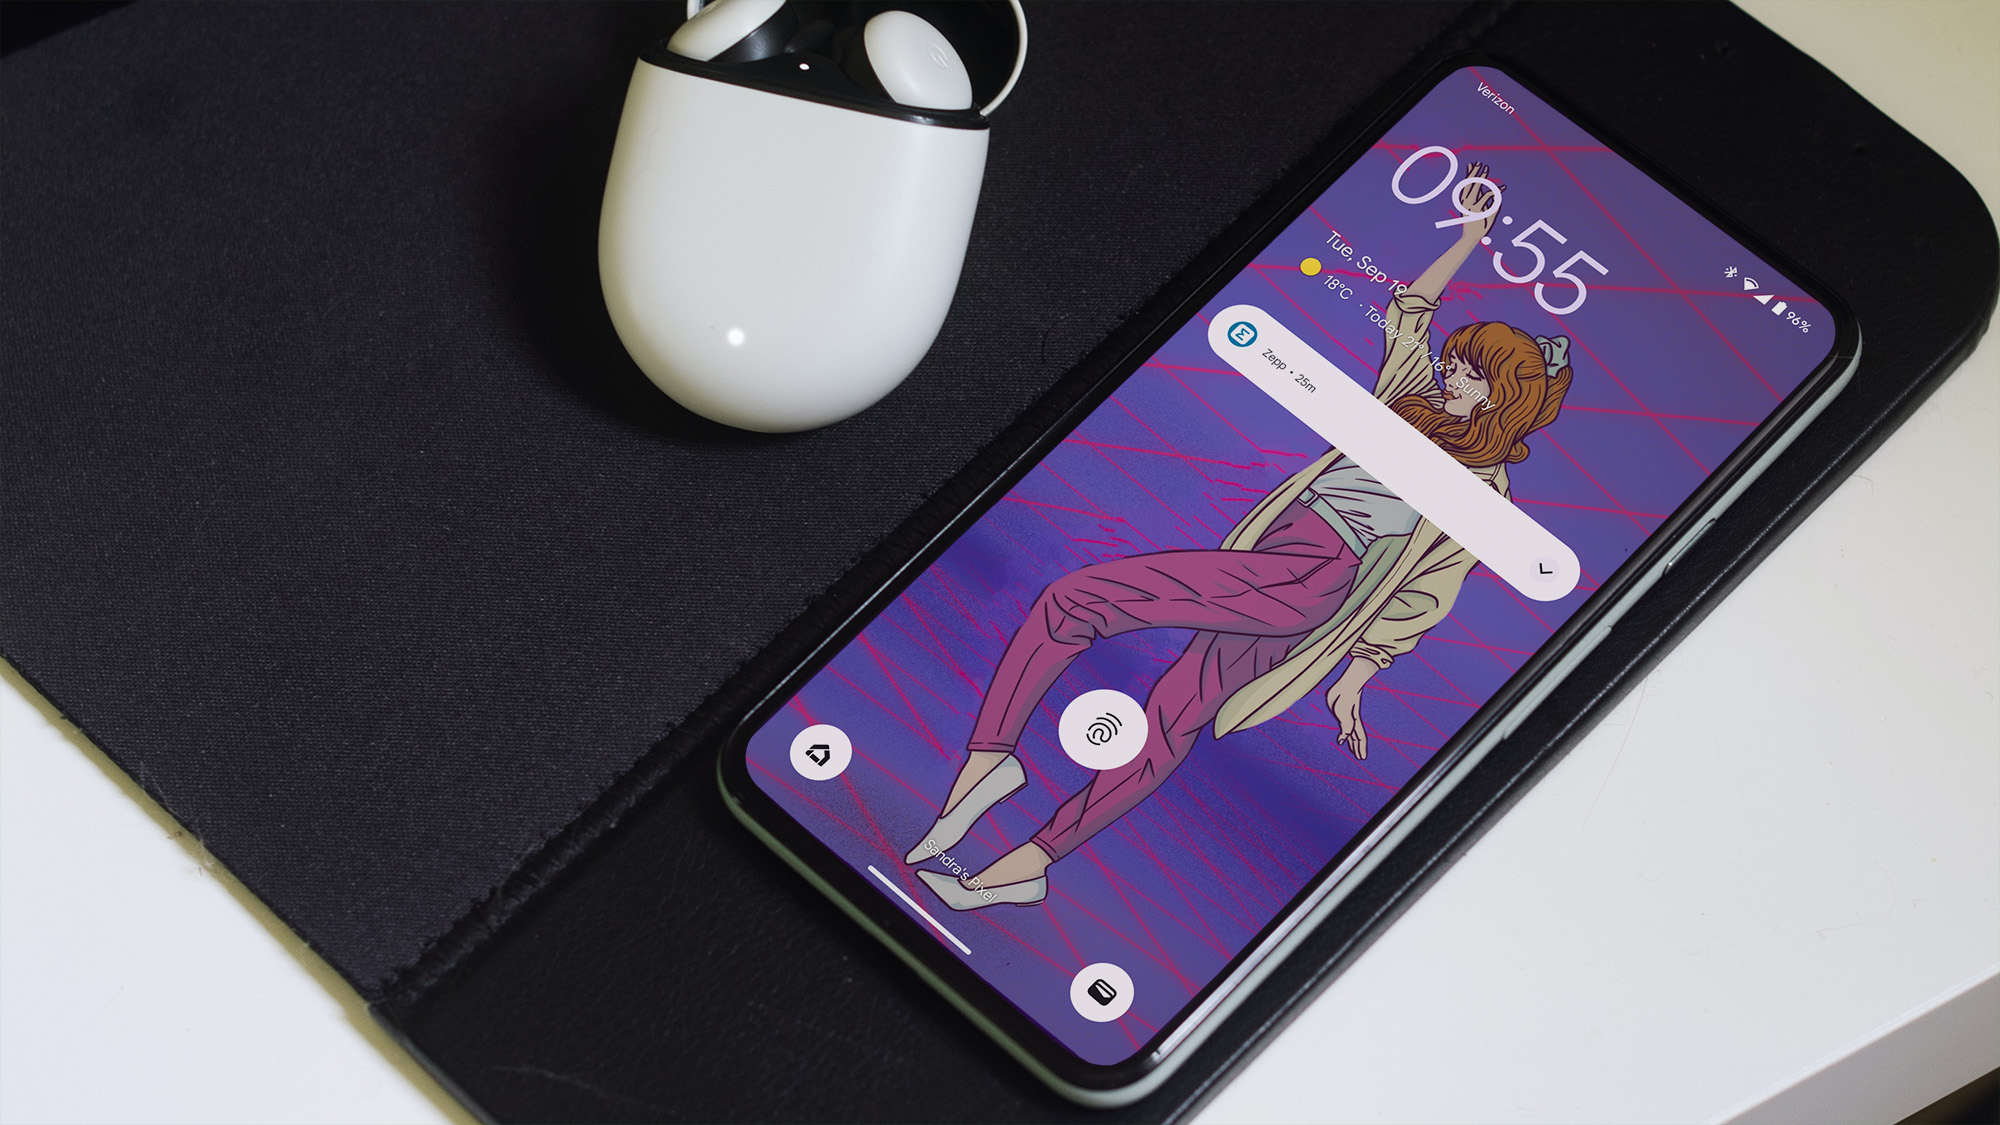 Emoji wallpapers and cinematic backdrops can make your Pixel phone as fun as you are